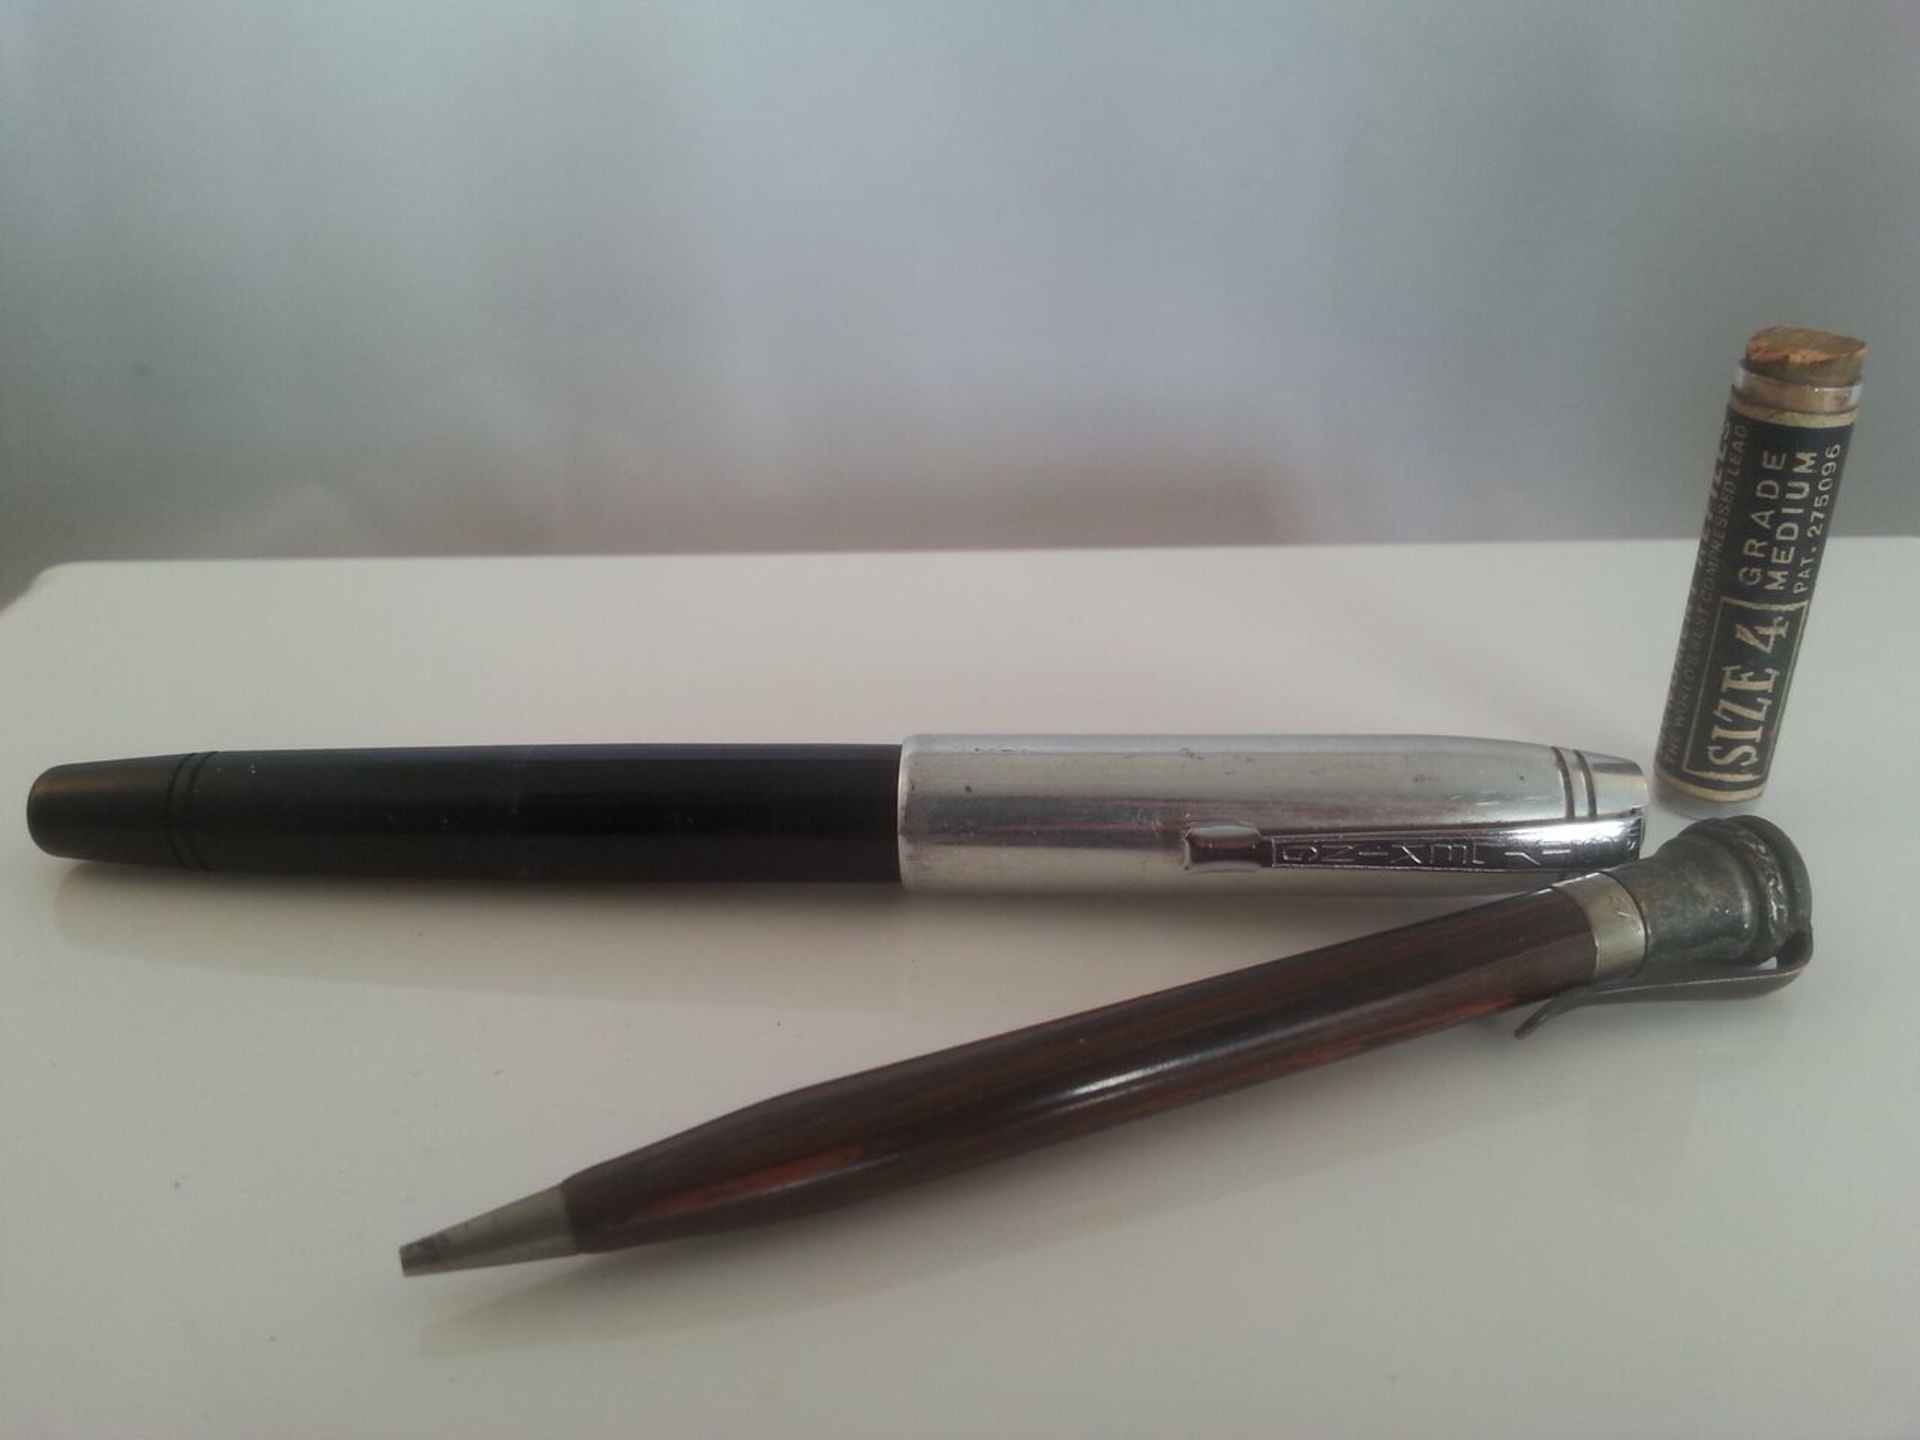 Small group of rare vintage collectable pen & pencil comprising a Style King pen patent pending &